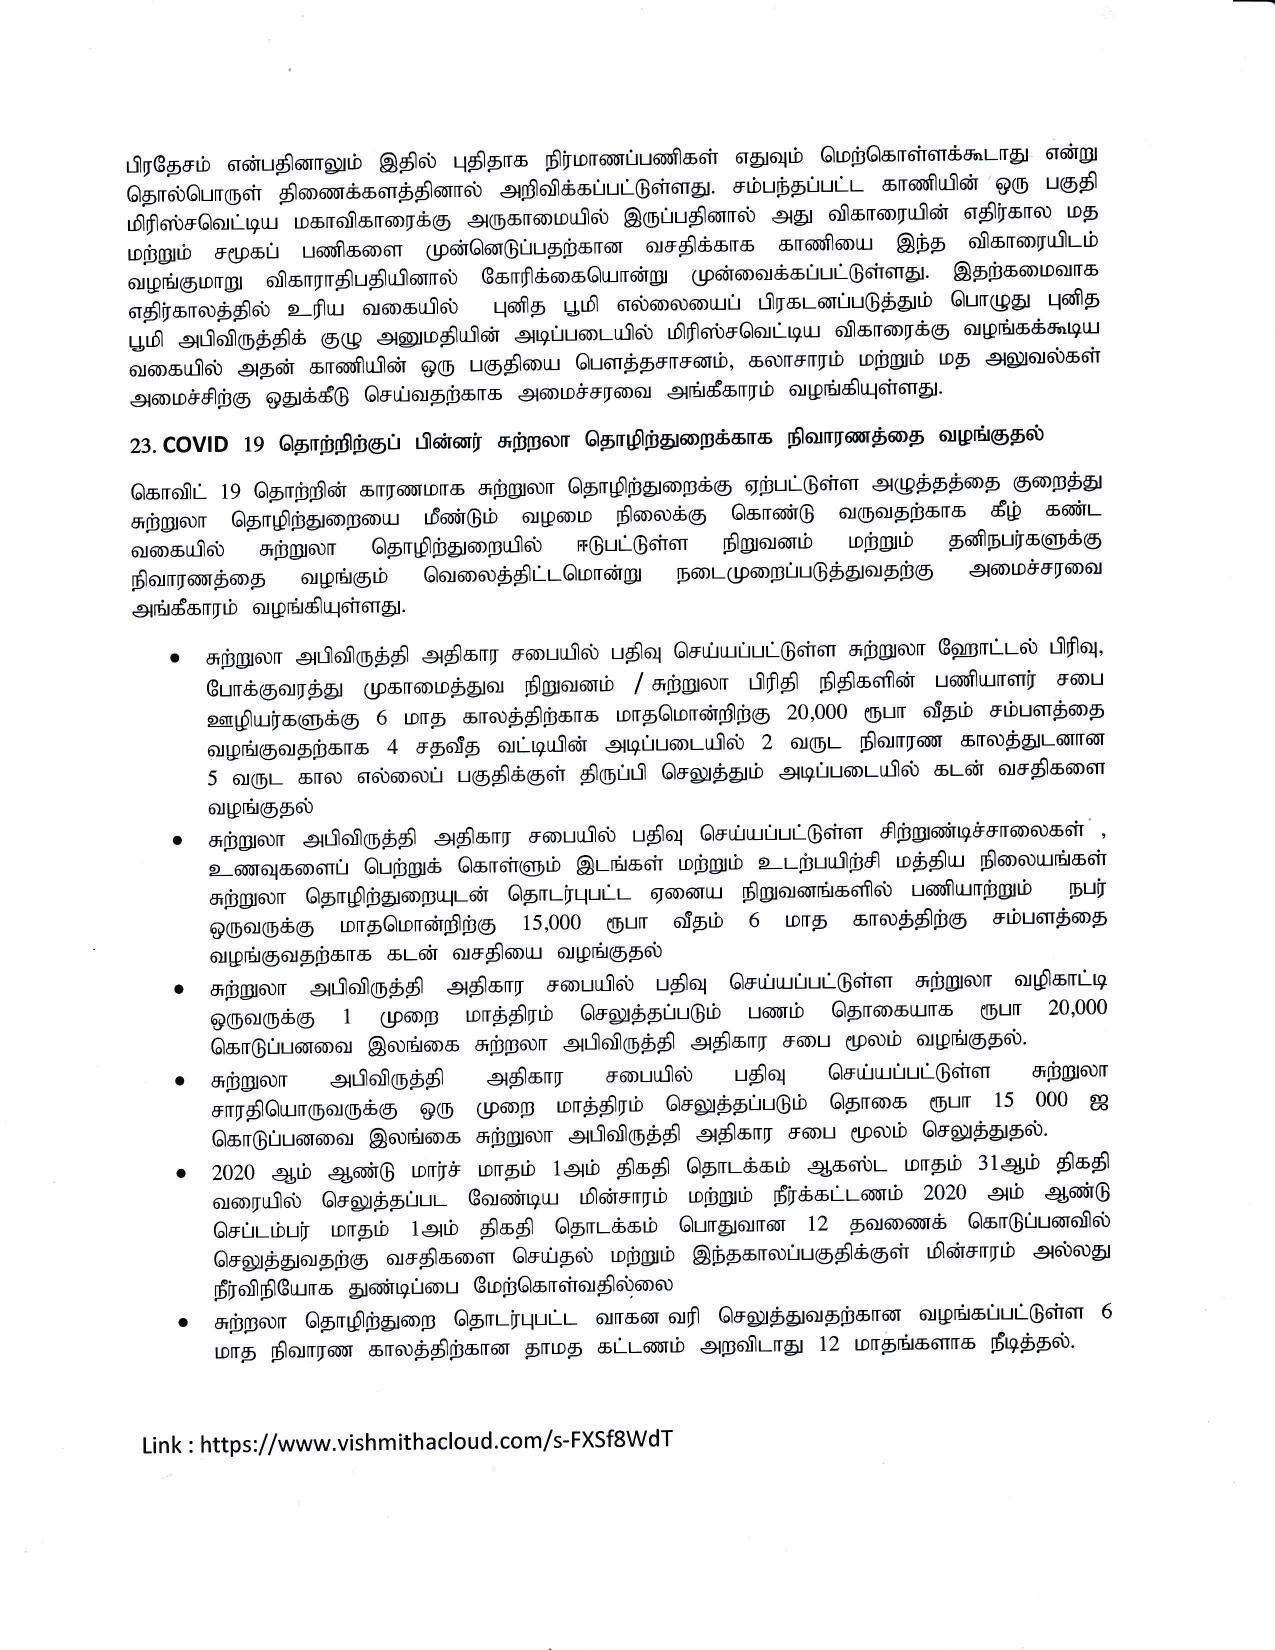 Tamil Cabinet 11.06.20 min page 008